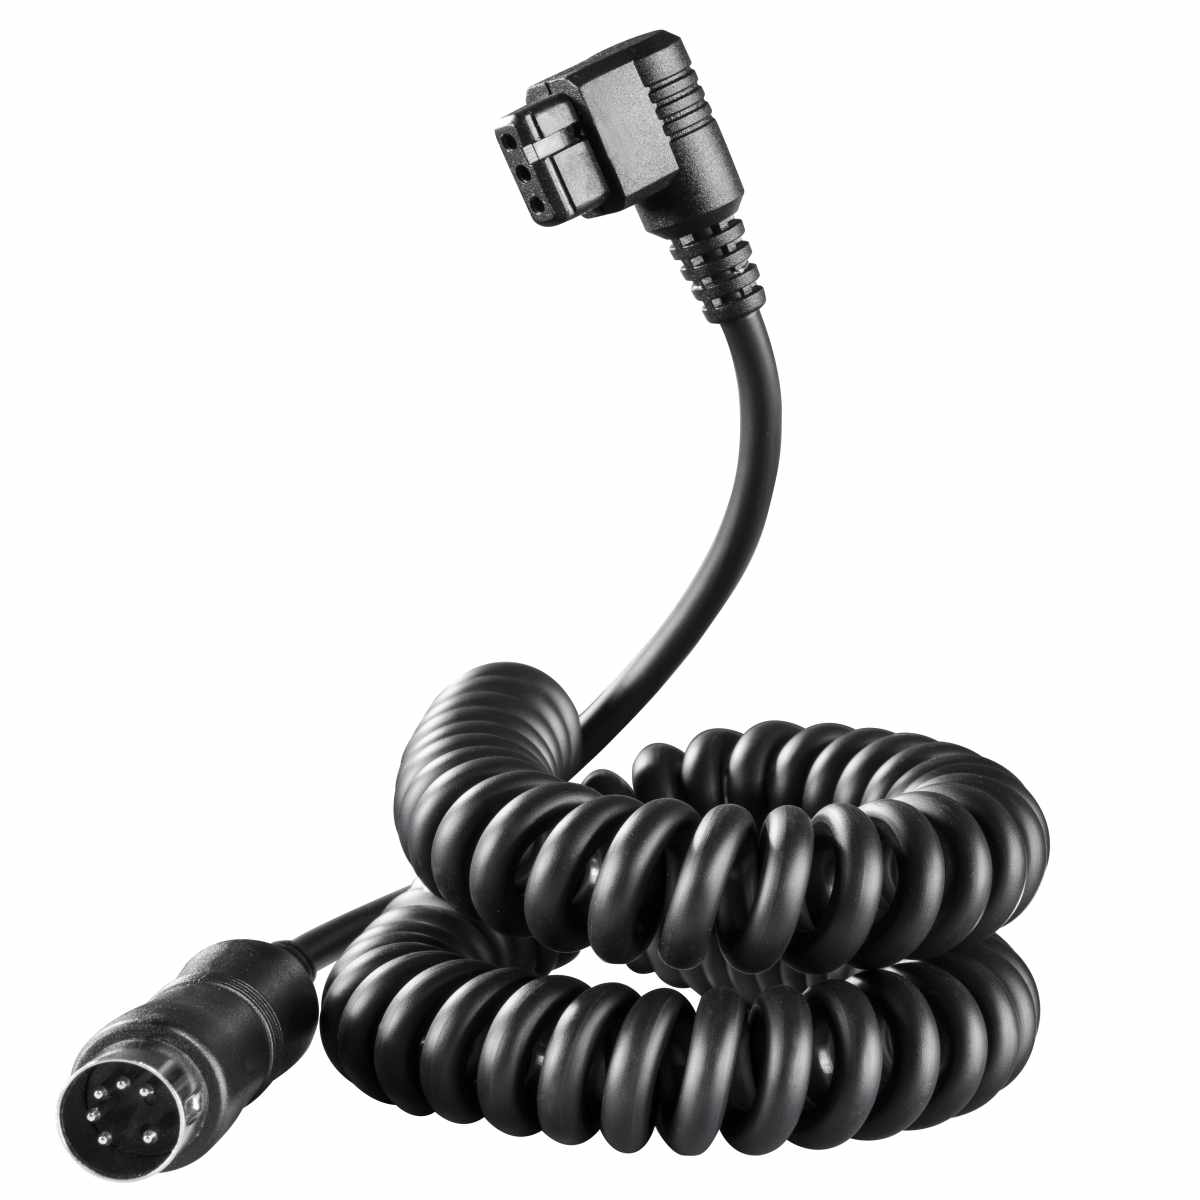 Walimex pro Powerblock Coiled Cord for Canon